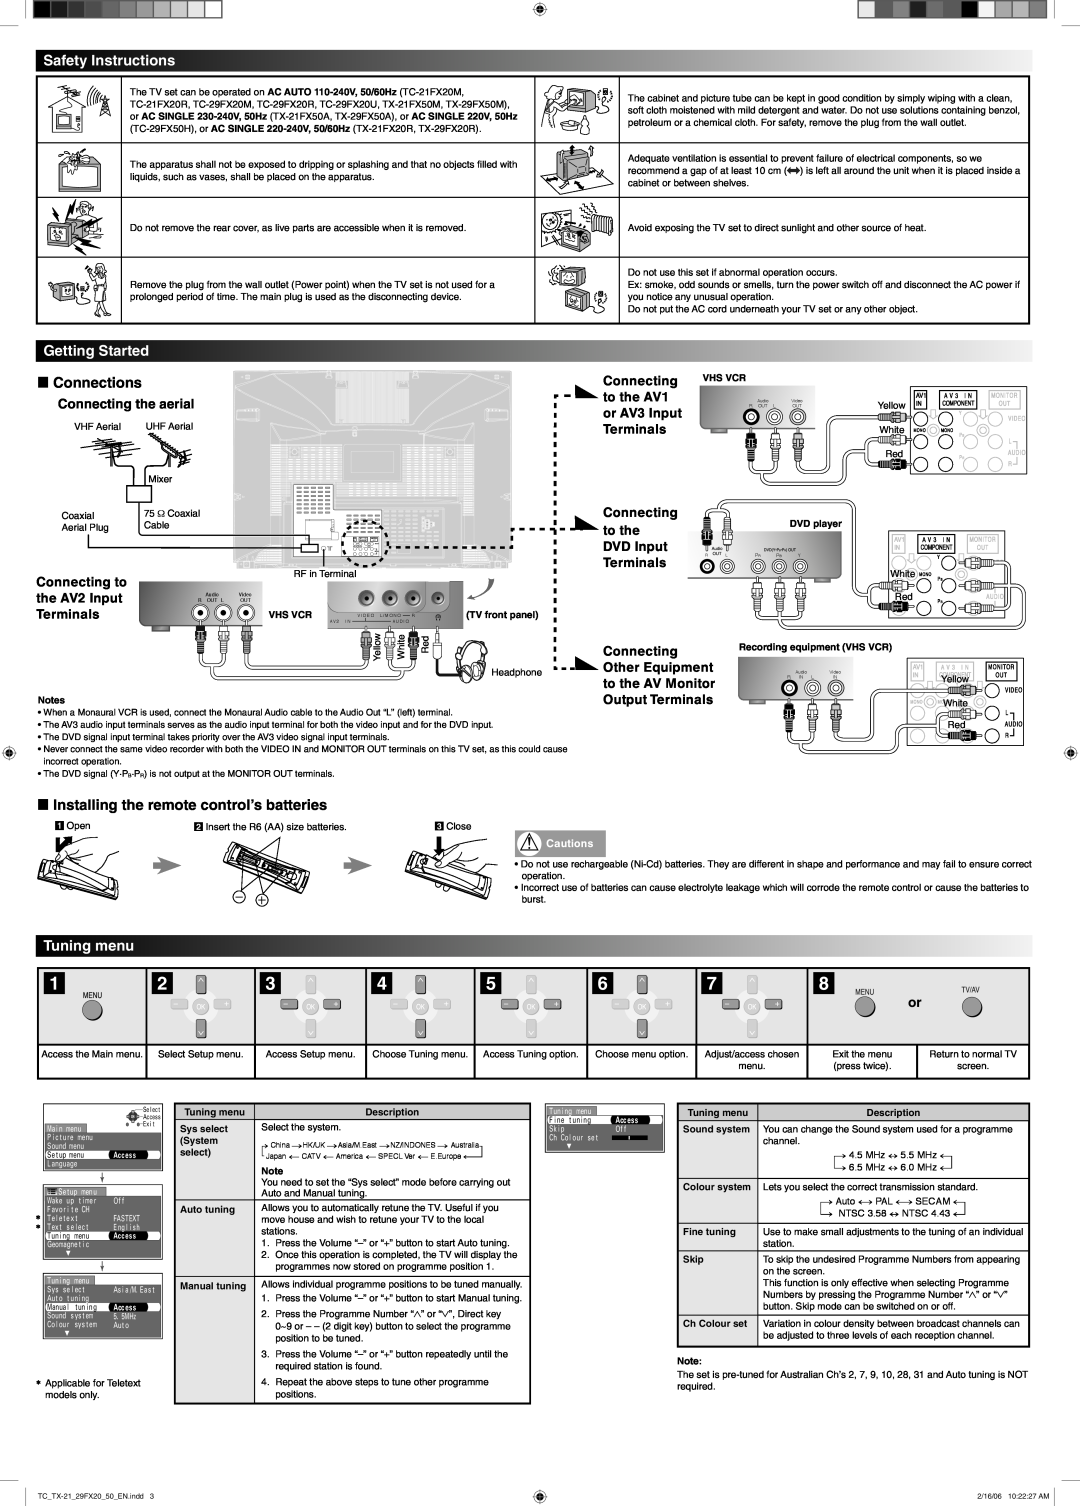 Panasonic TC-29FX20 Series Safety Instructions, Getting Started, L Connections, Tuning menu, Connecting the aerial 